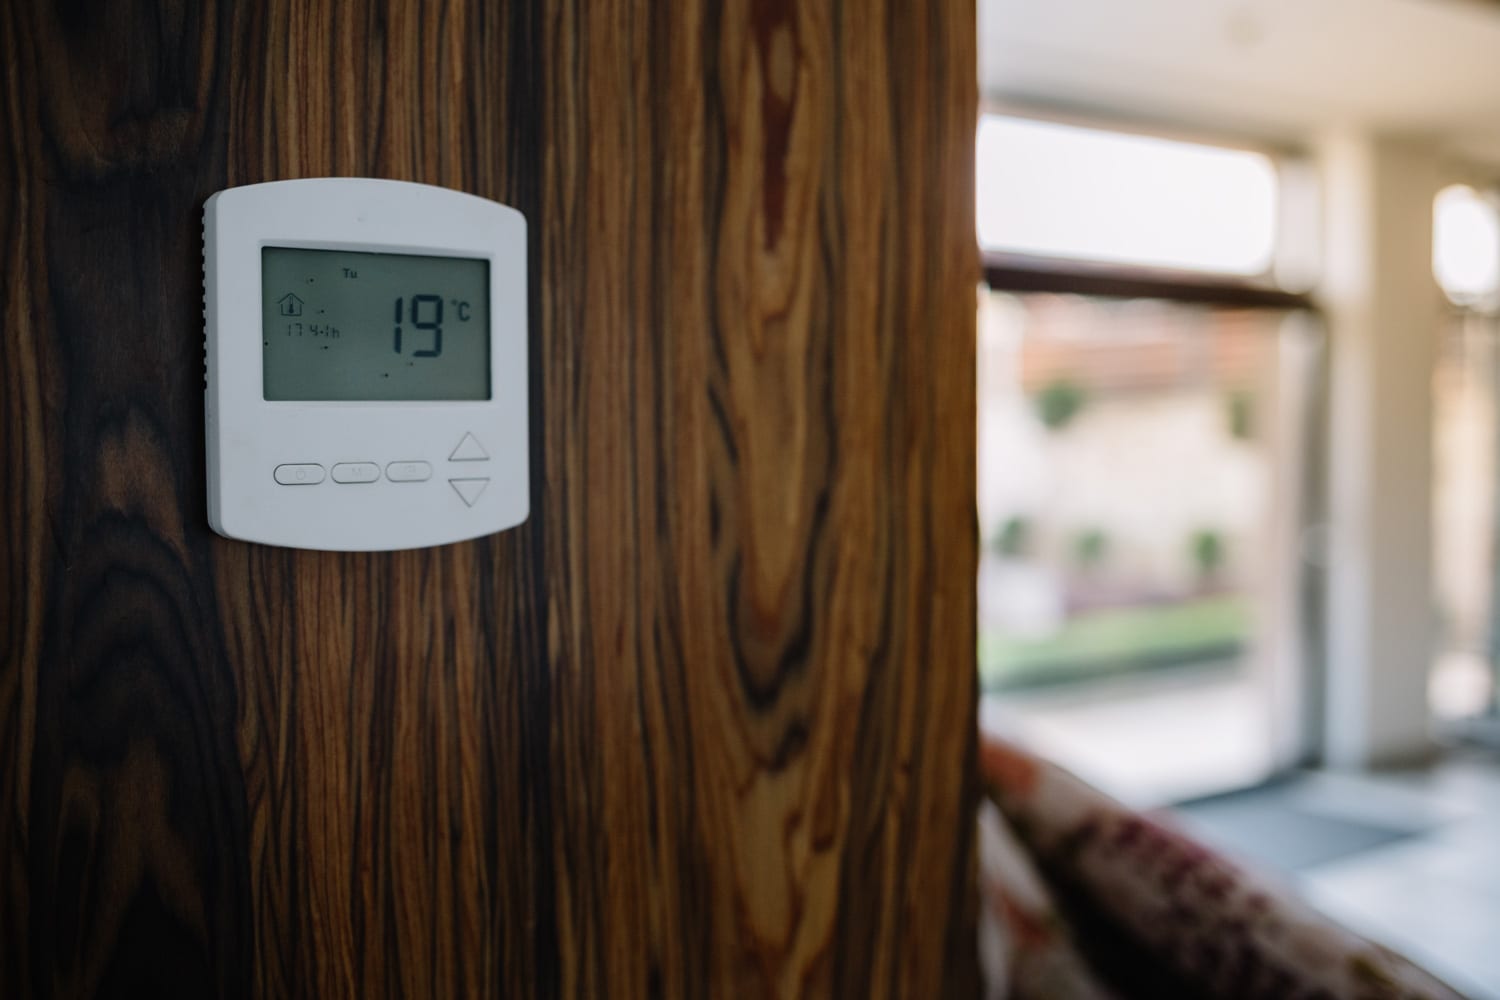 Programmable thermostat for temperature control in home